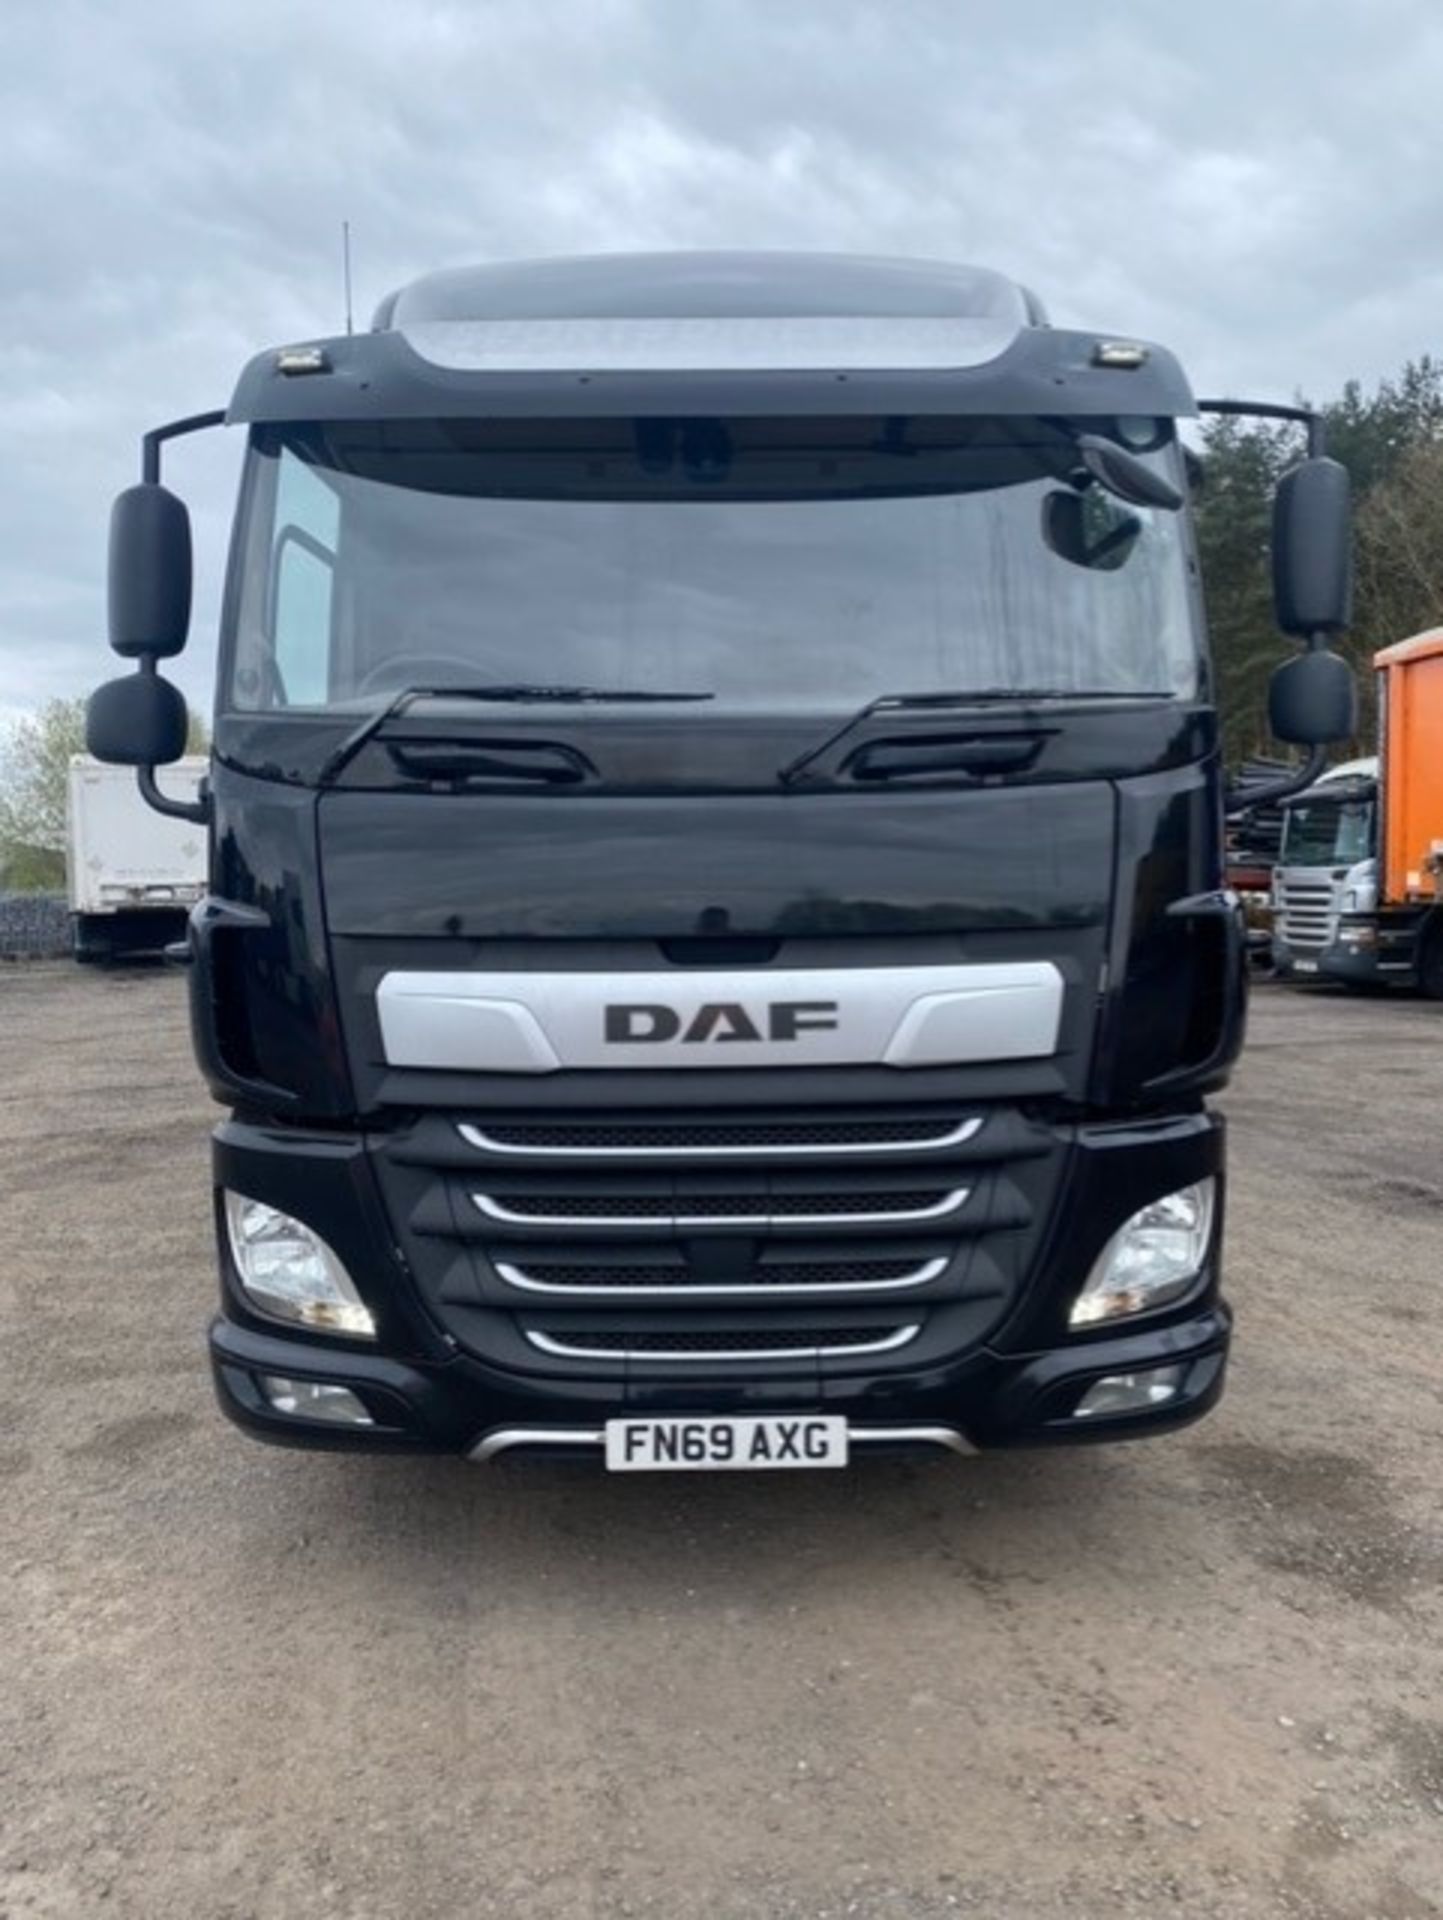 2019, DAF CF 260 FA (Ex-Fleet Owned & Maintained) - FN69 AXG (18 Ton Rigid Truck with Tail Lift) - Image 13 of 16